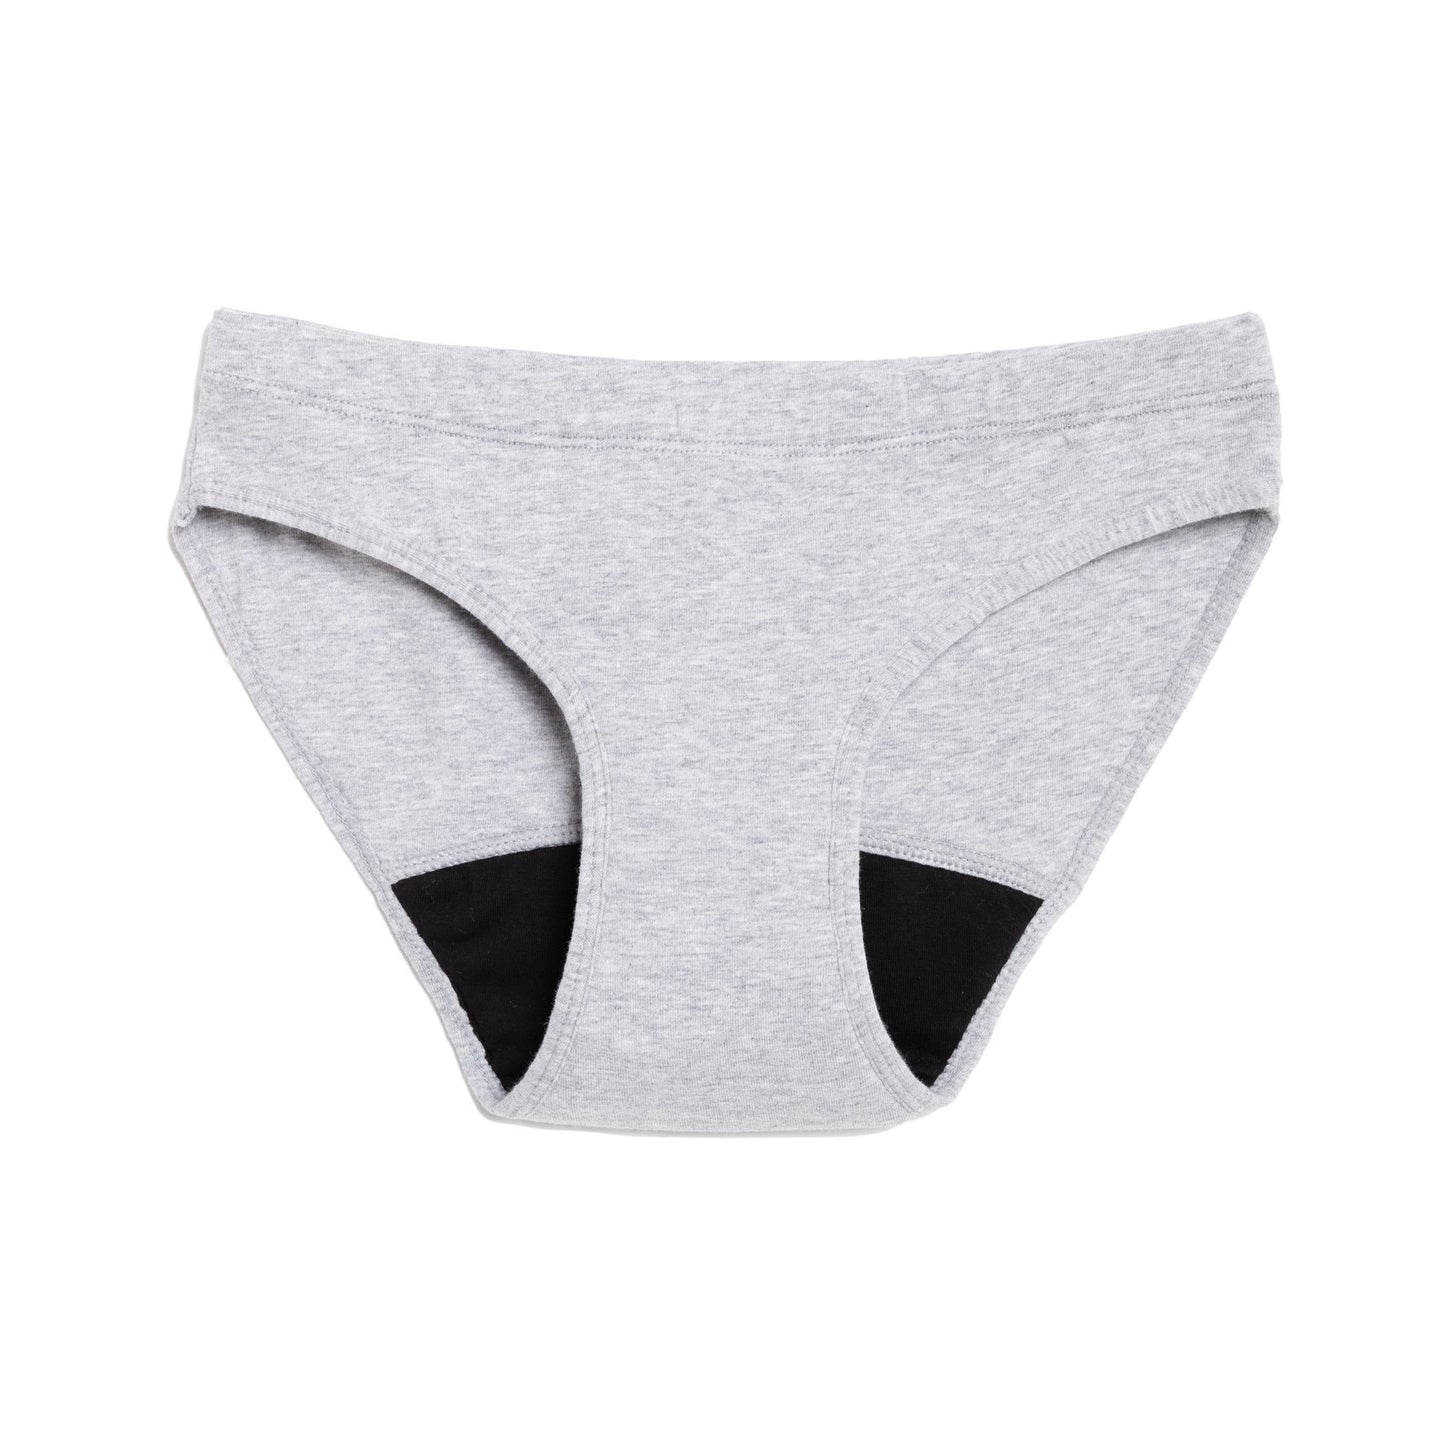 The Period Company The Sporty Thong Period Underwear